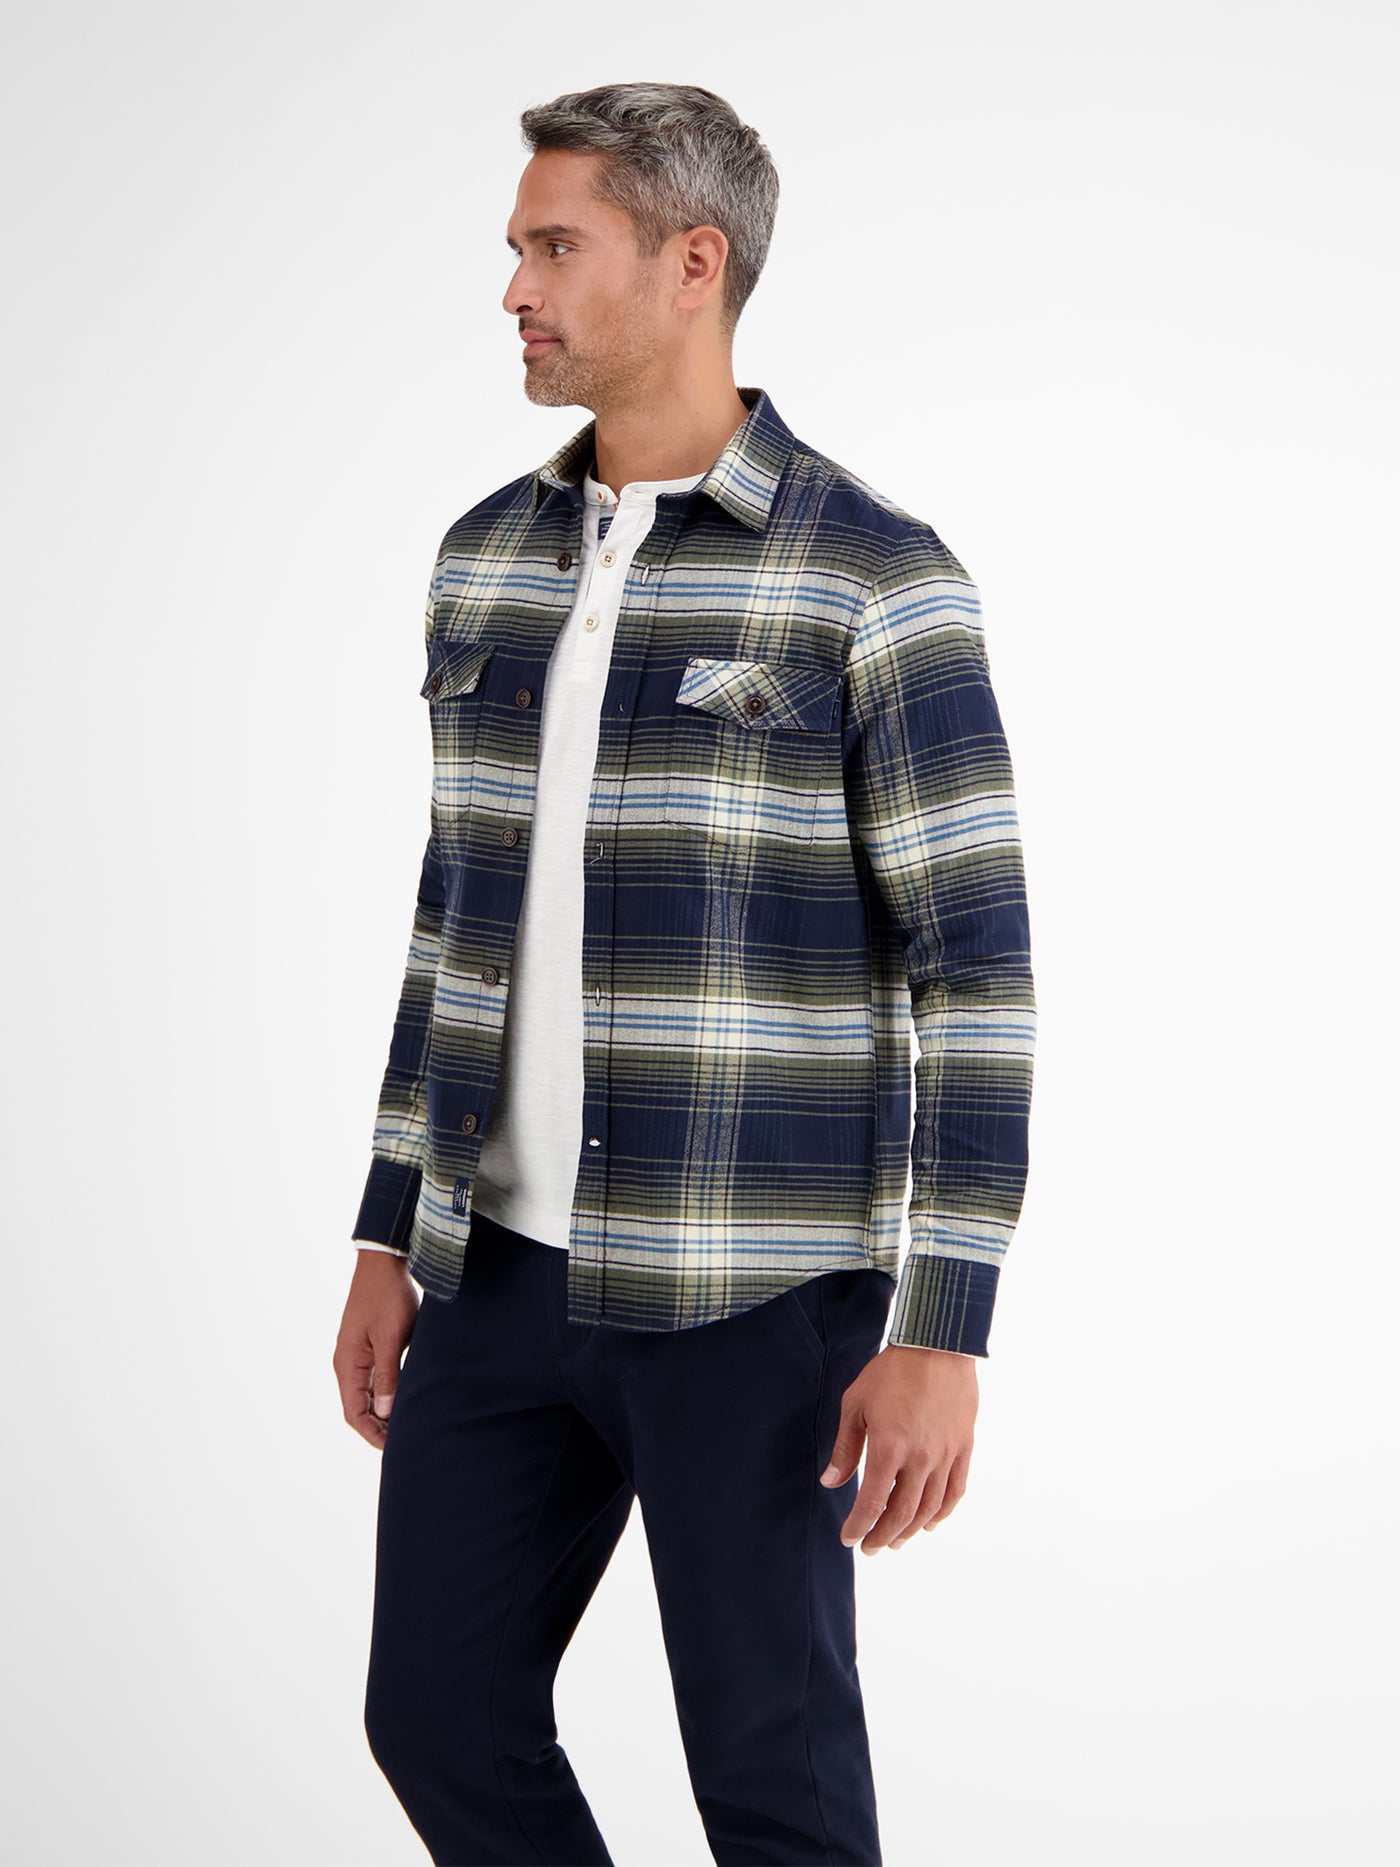 Lässiges Overshirt in Flanell-Check